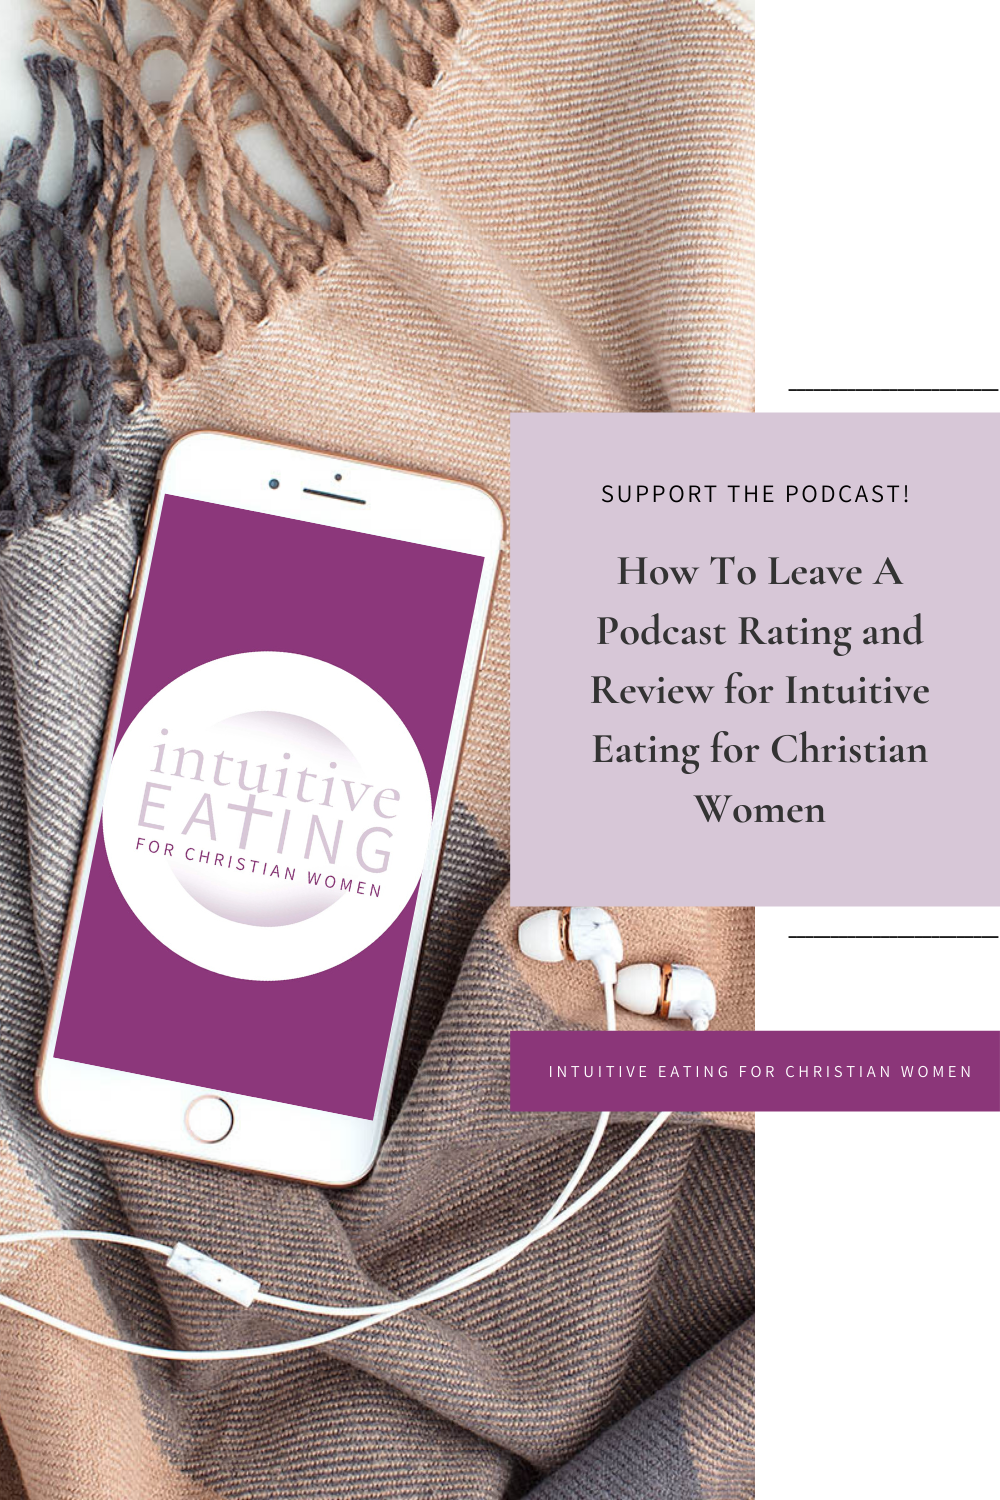 How To Leave A Podcast Rating and Review for Intuitive Eating for Christian Women